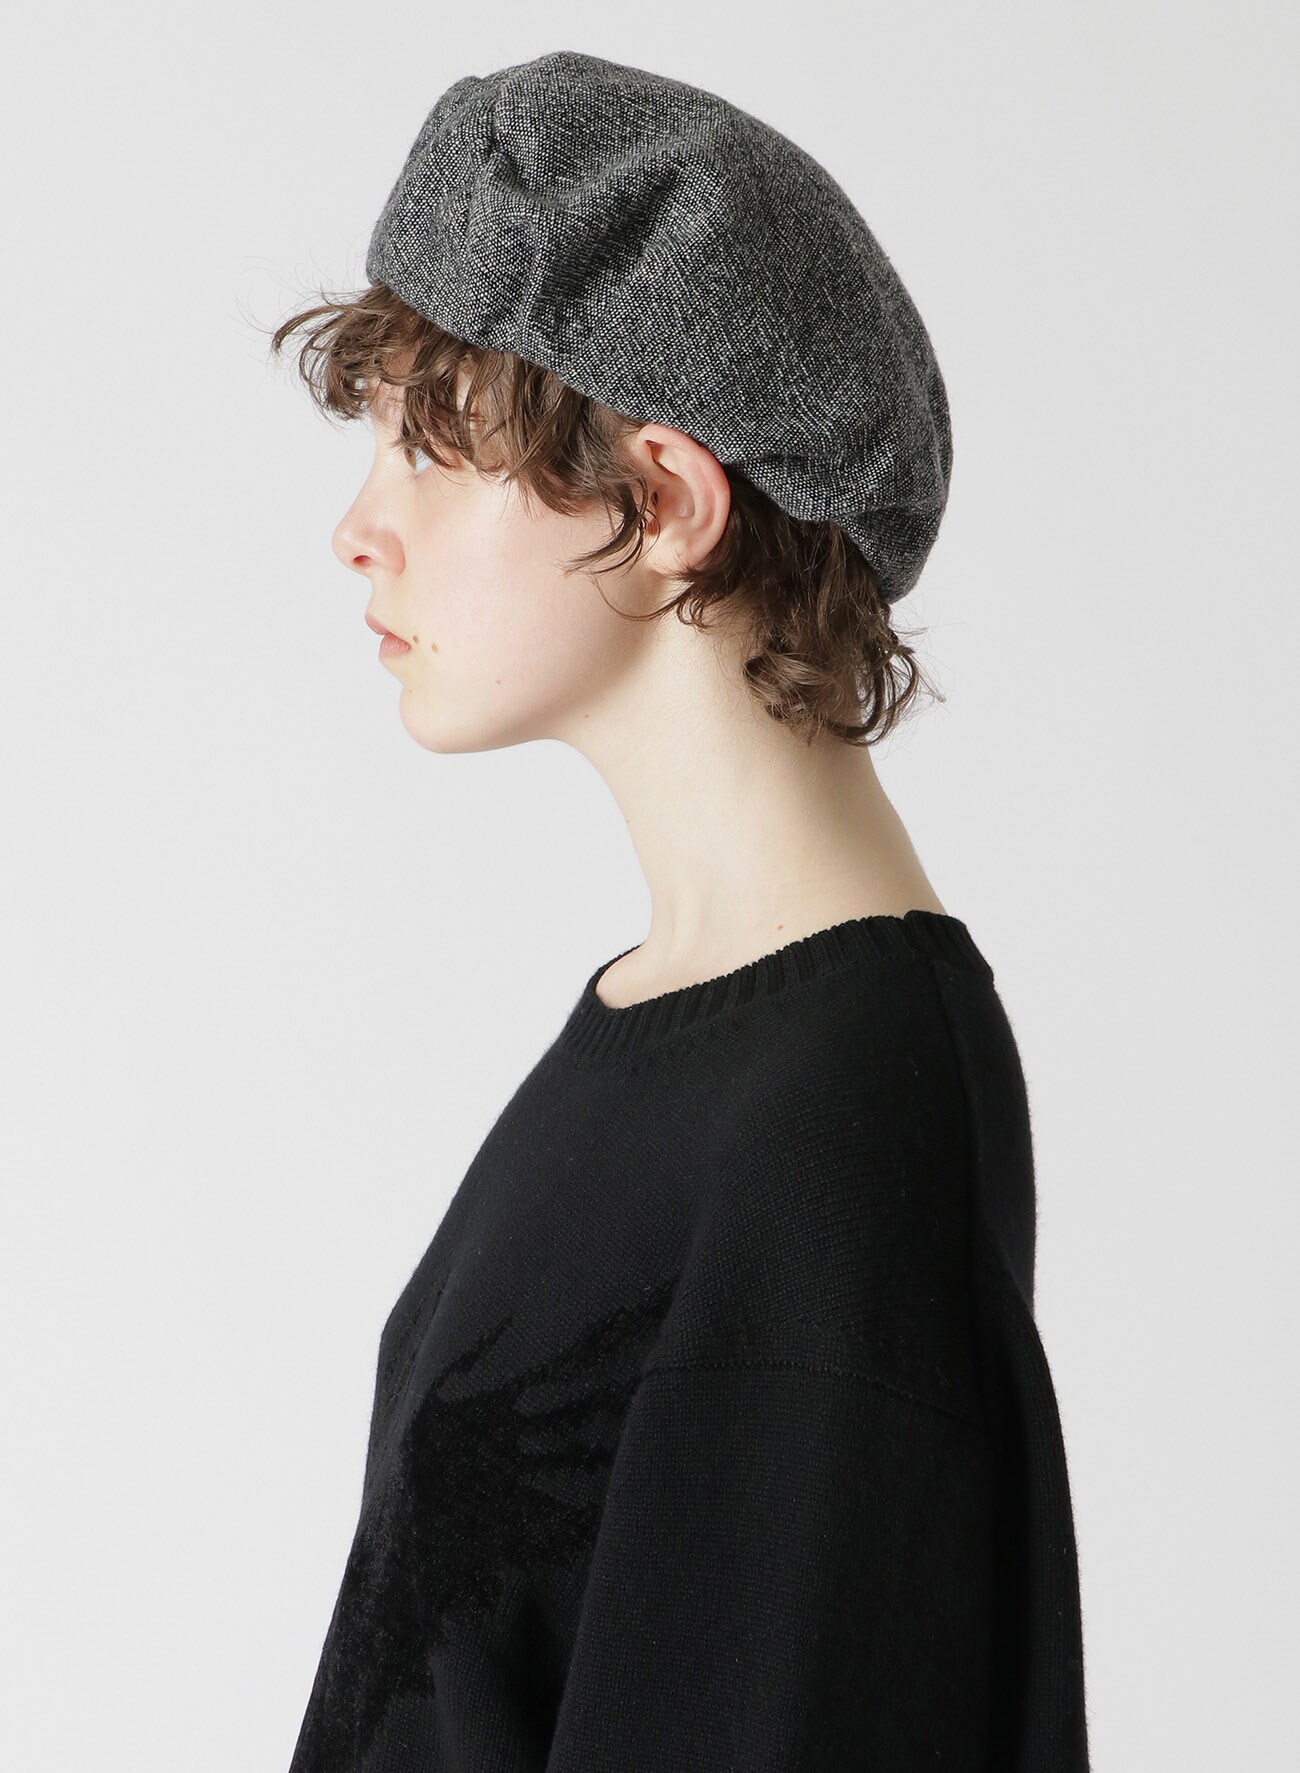 CRUMPLED WOOL TWEED BERET(FREE SIZE White x Black): Y's｜THE SHOP